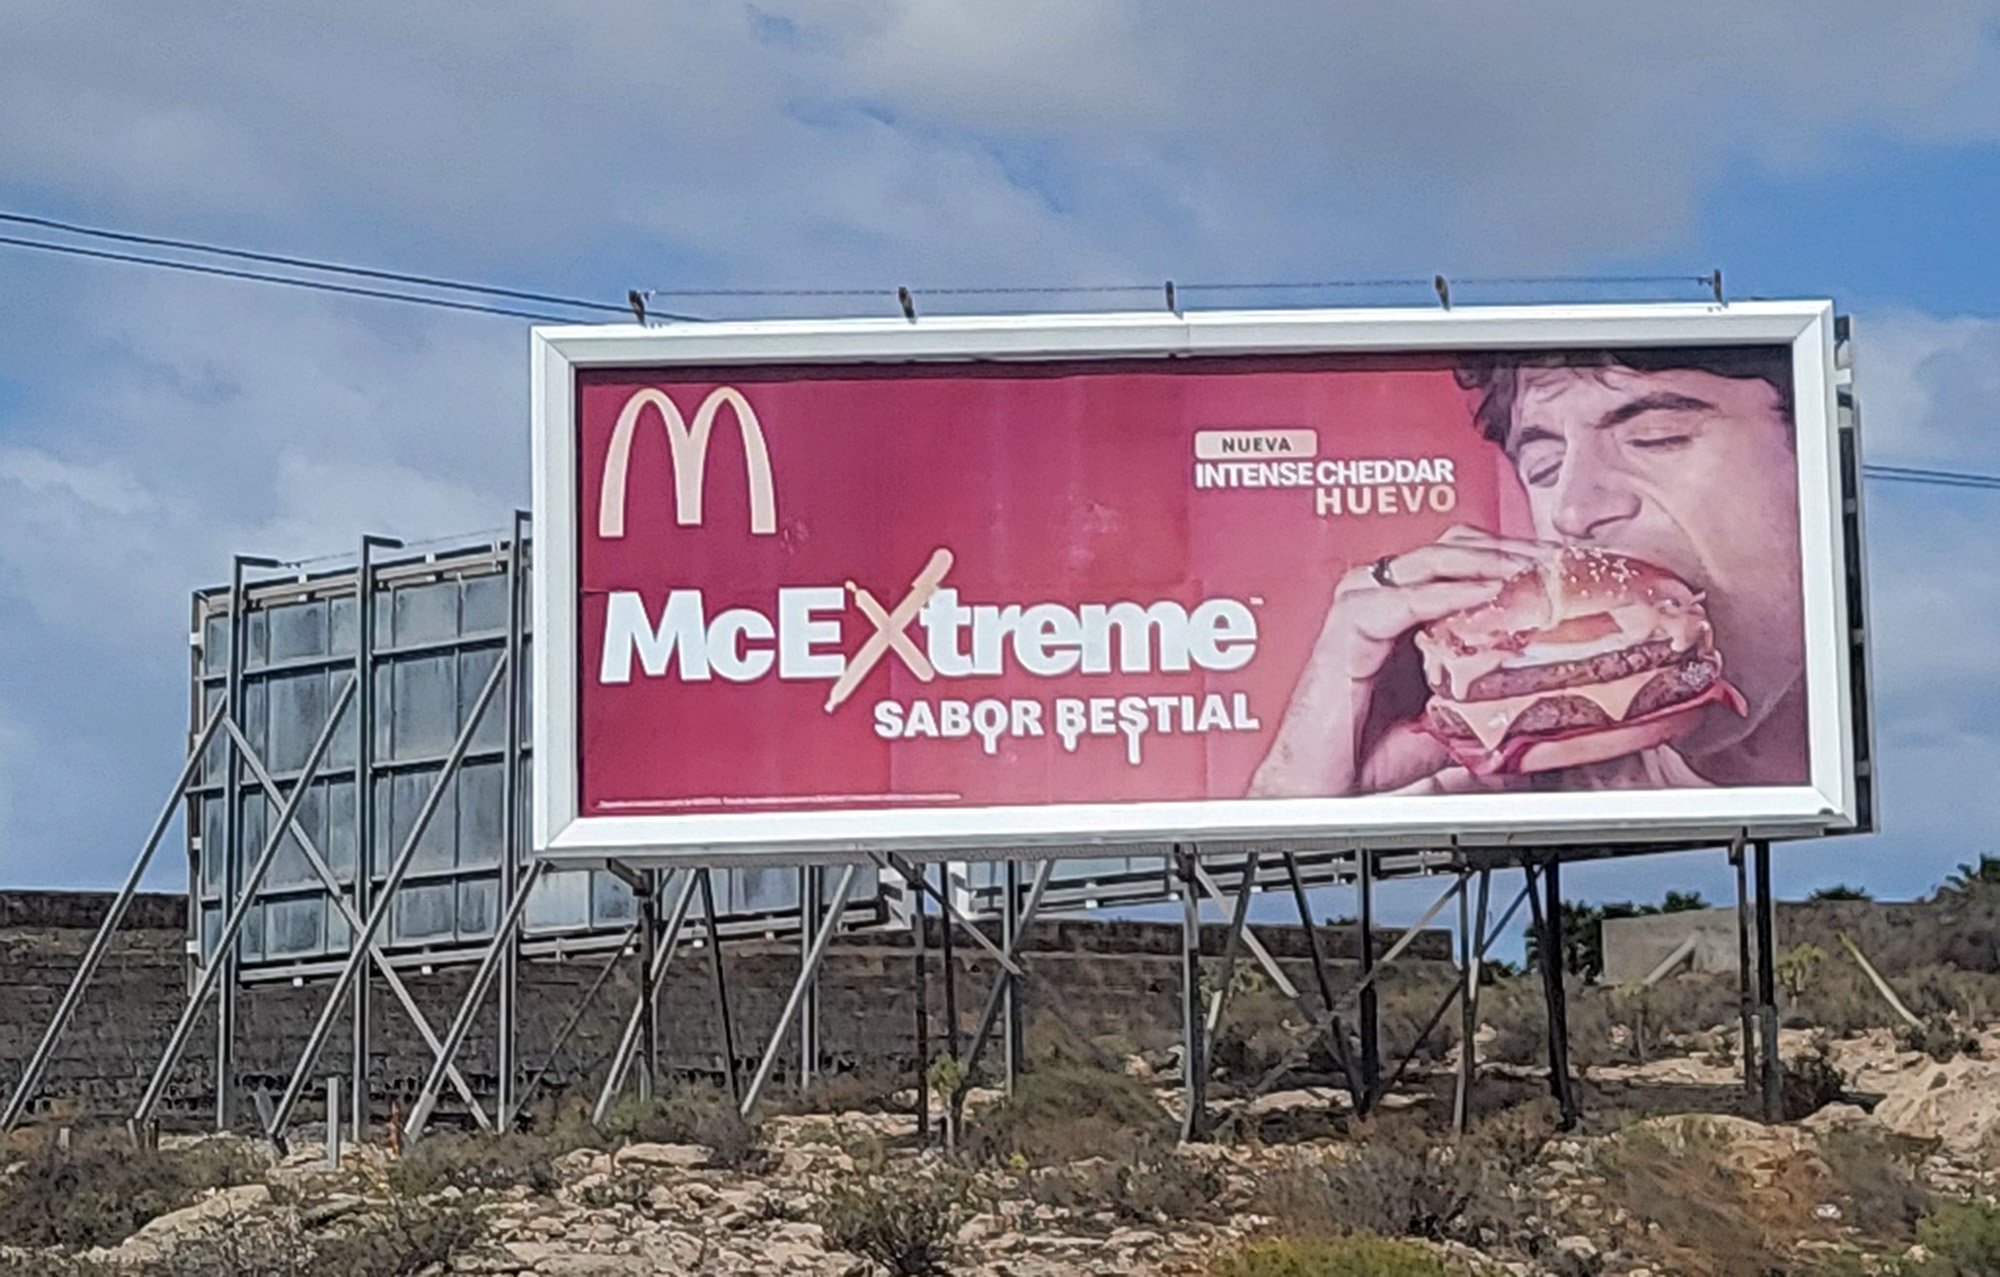 Just a pic of my favorite ad from Spain. He's just loving his overpriced fast food greaseball. Look at him.